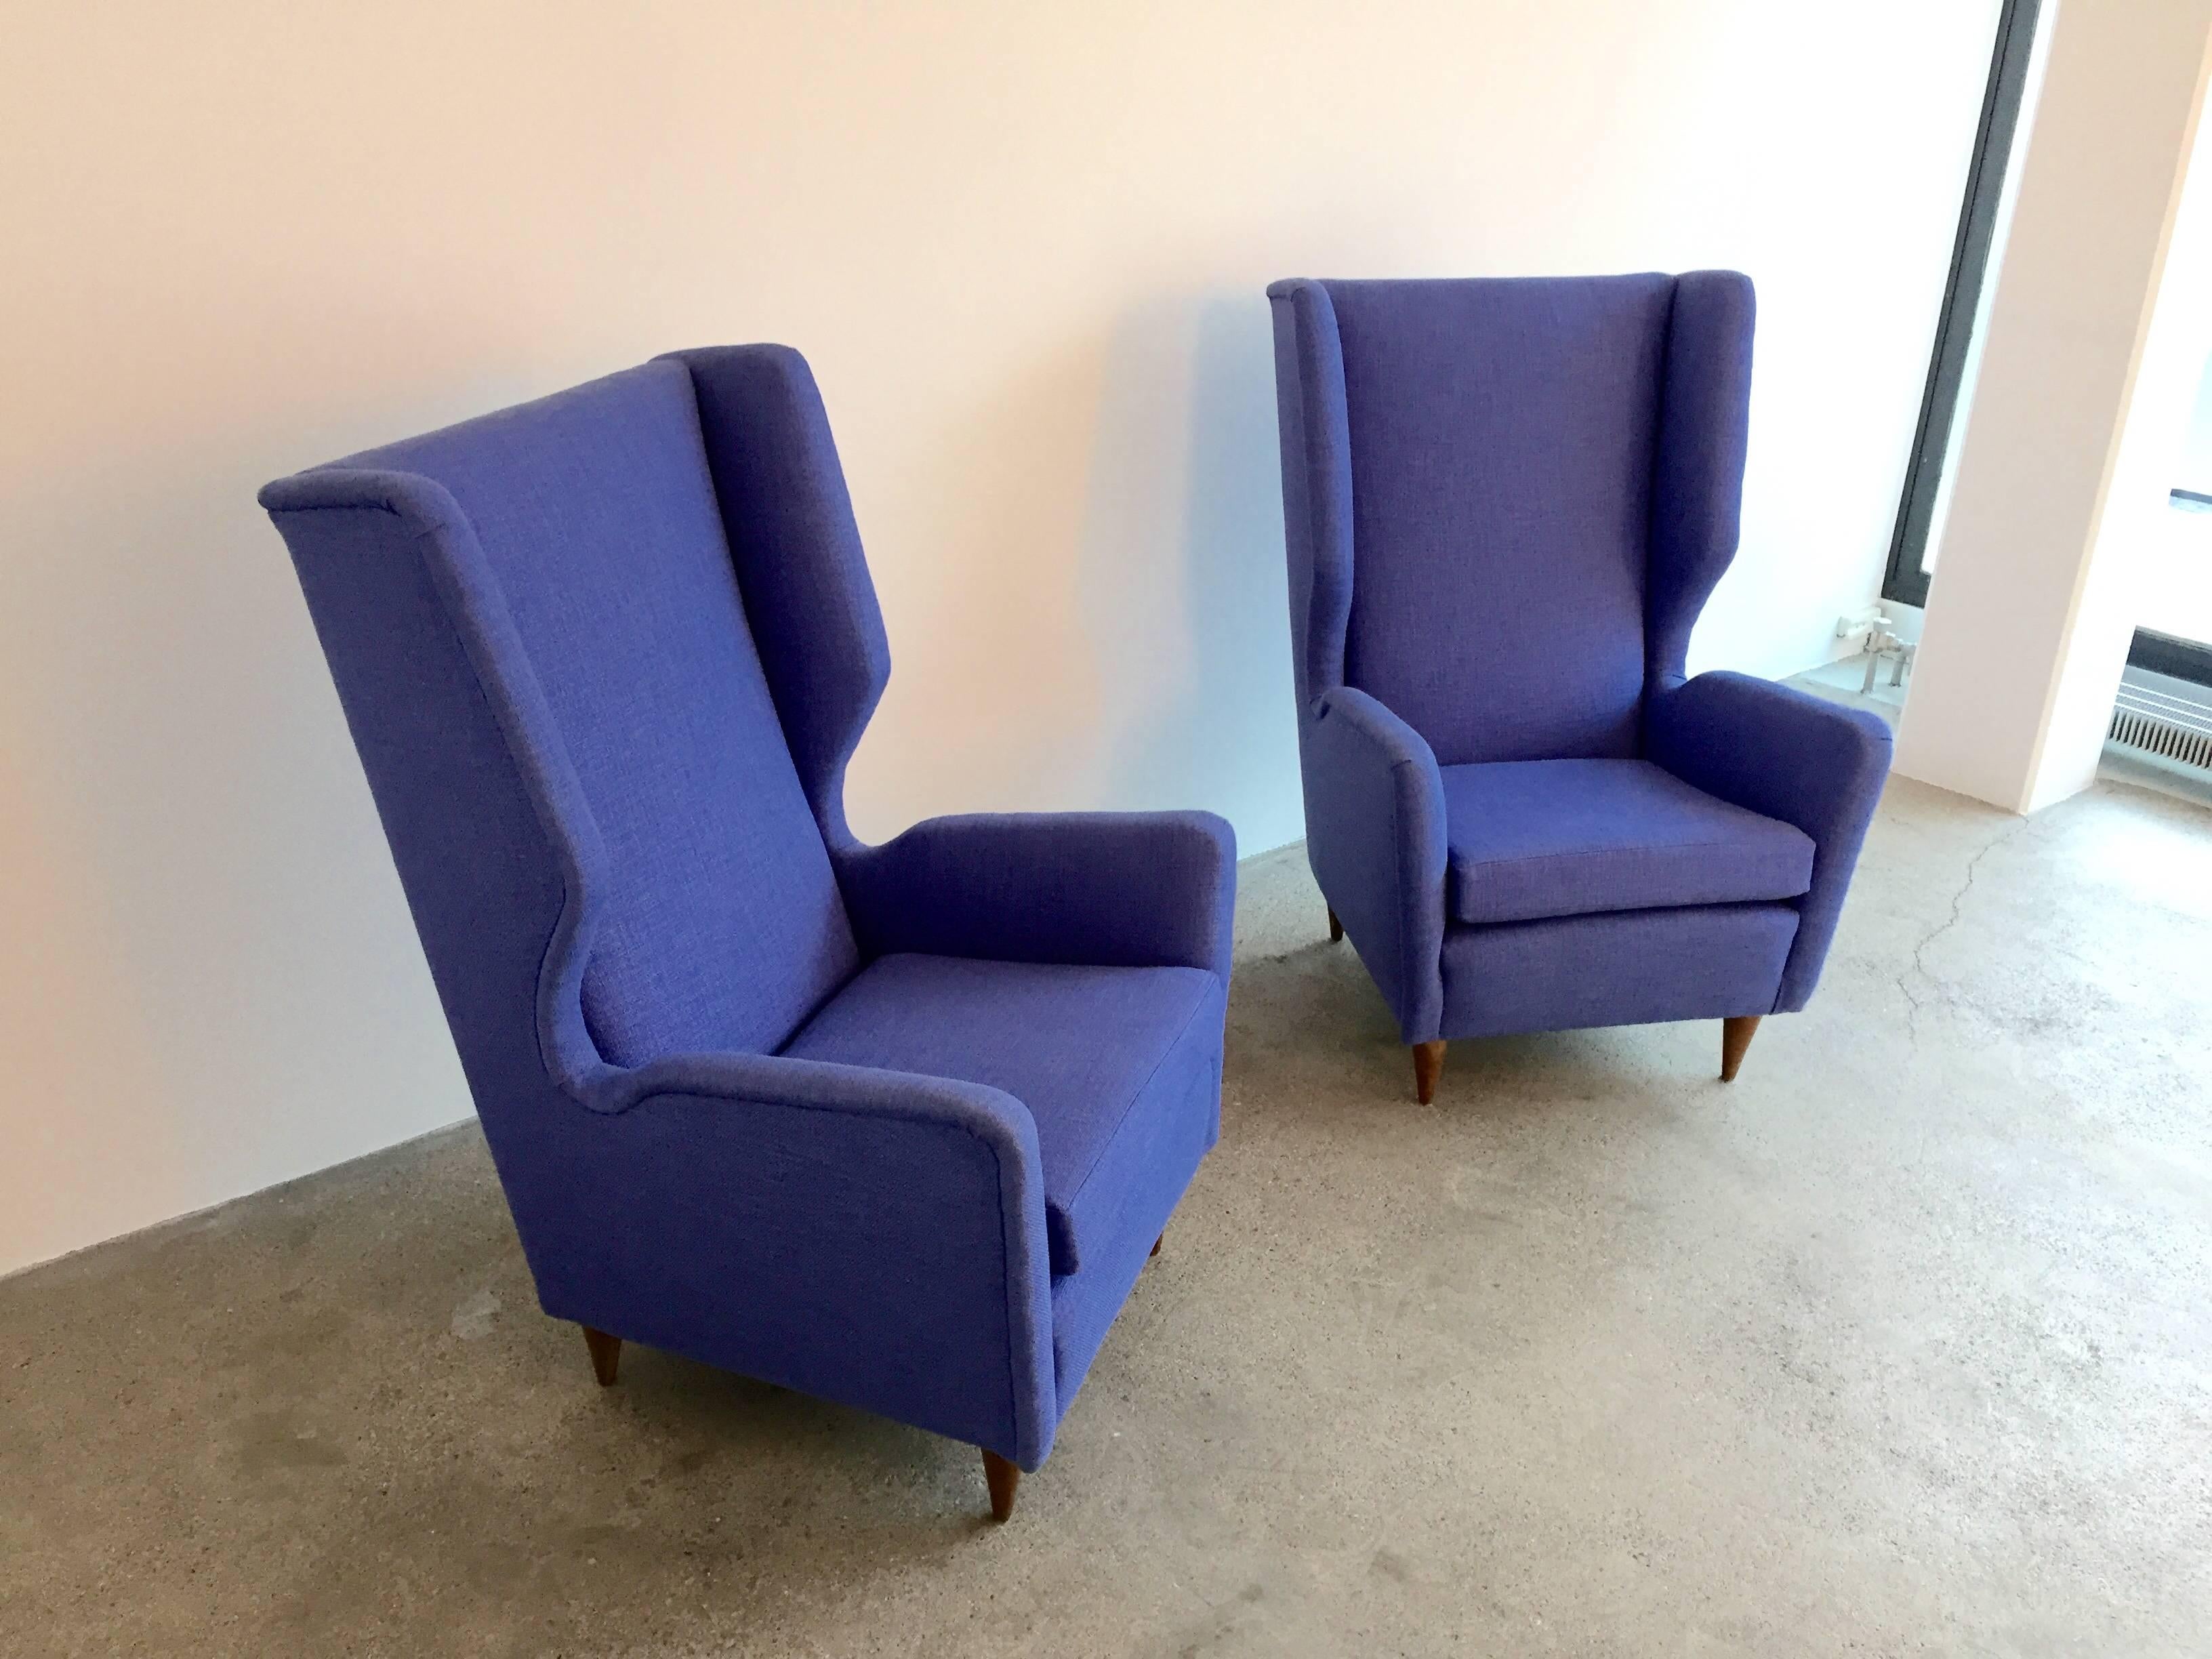 Pair of armchairs designed by Gio Ponti.
Re-upholstered with blue fabric.
Excellent condition.